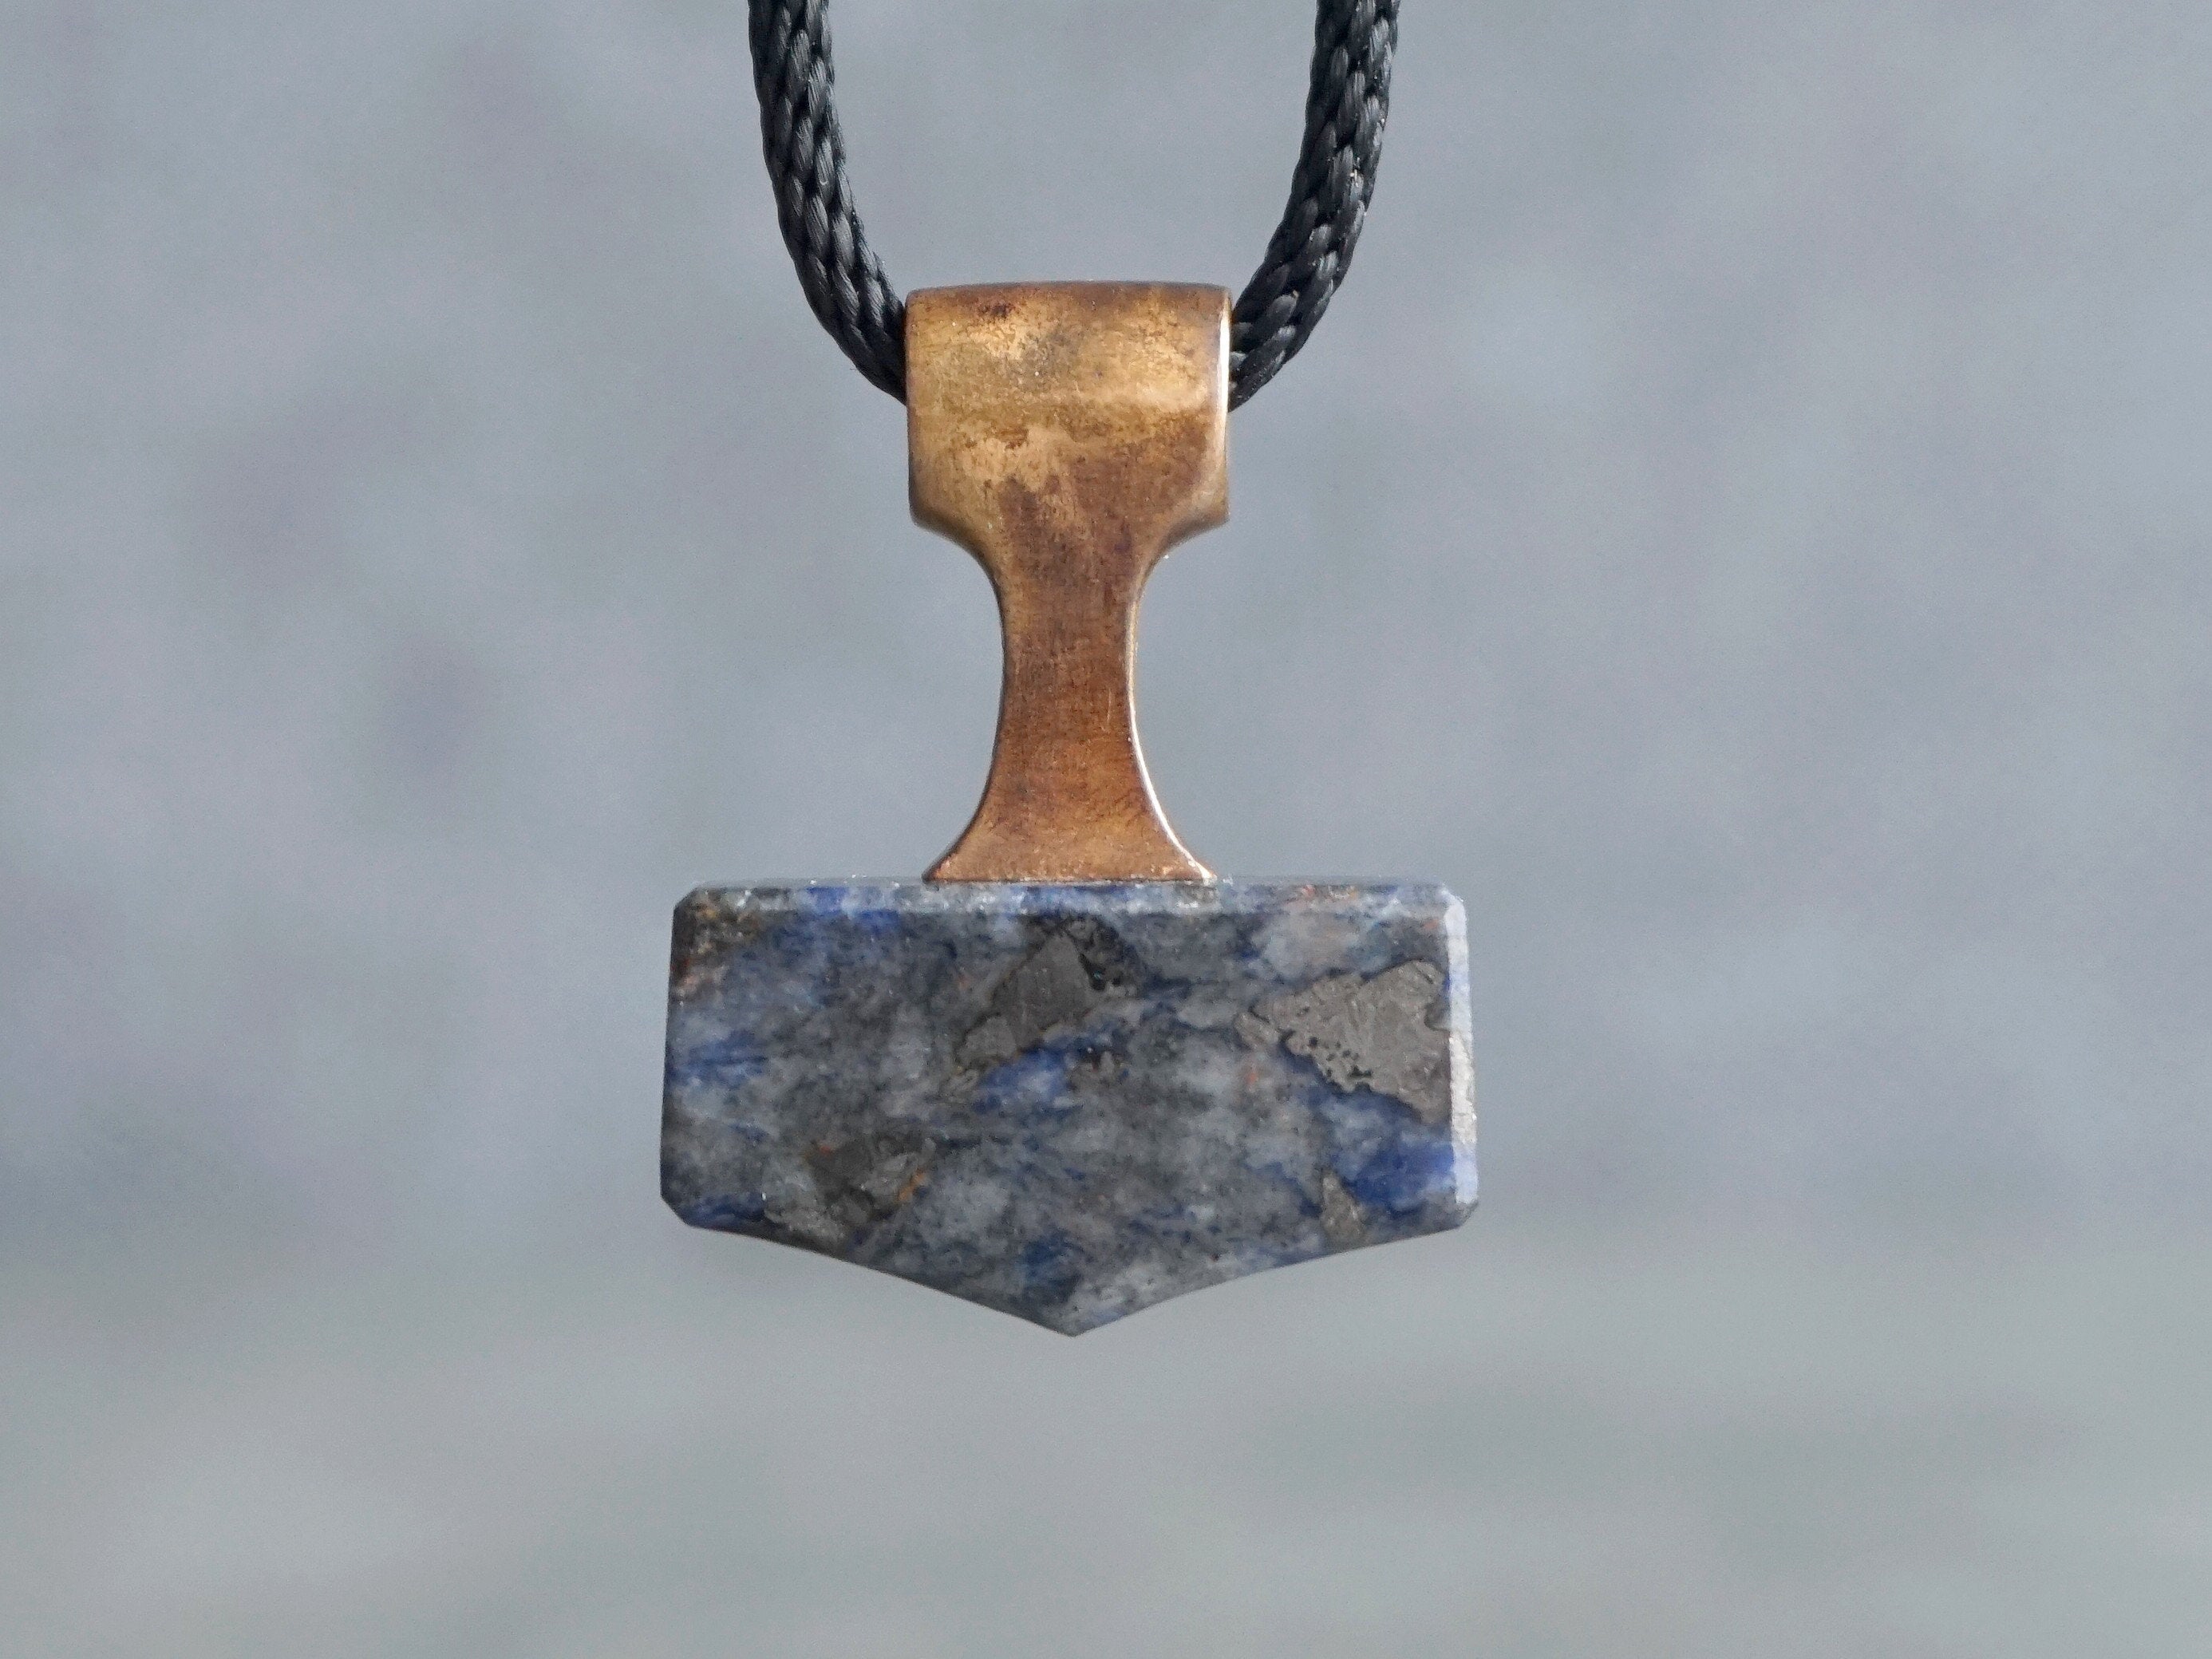 Thors hammer pendant in 2 sizes. Viking jewelry. Bronze and sodalite necklace. Natural stone Asatru jewelry.